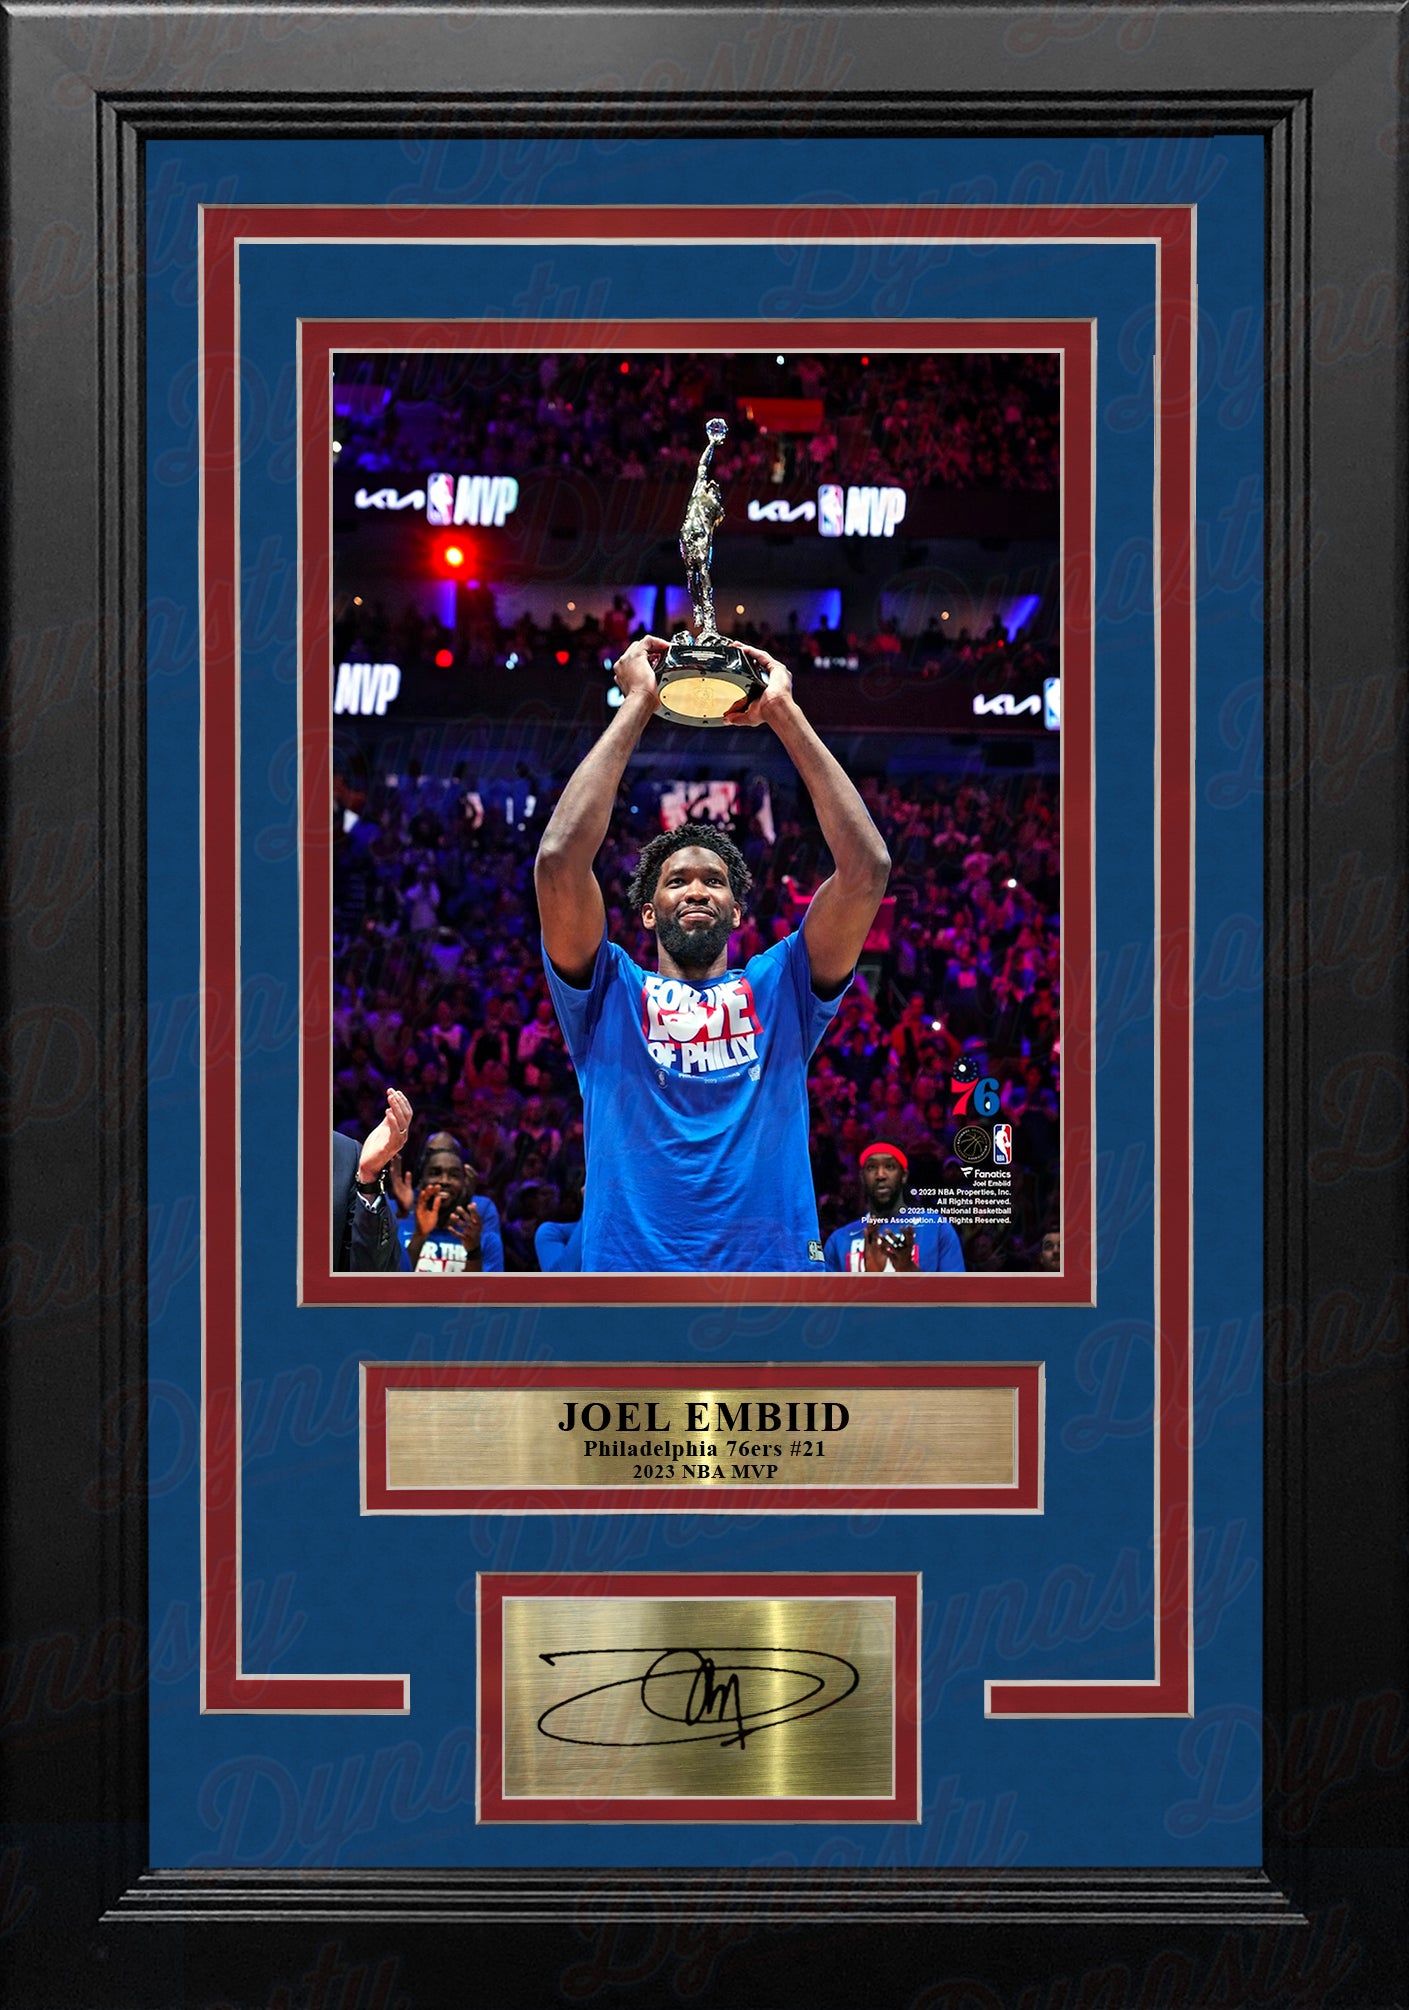 Joel Embiid 2023 MVP Trophy Philadelphia 76ers 8" x 10" Framed Basketball Photo with Engraved Autograph - Dynasty Sports & Framing 